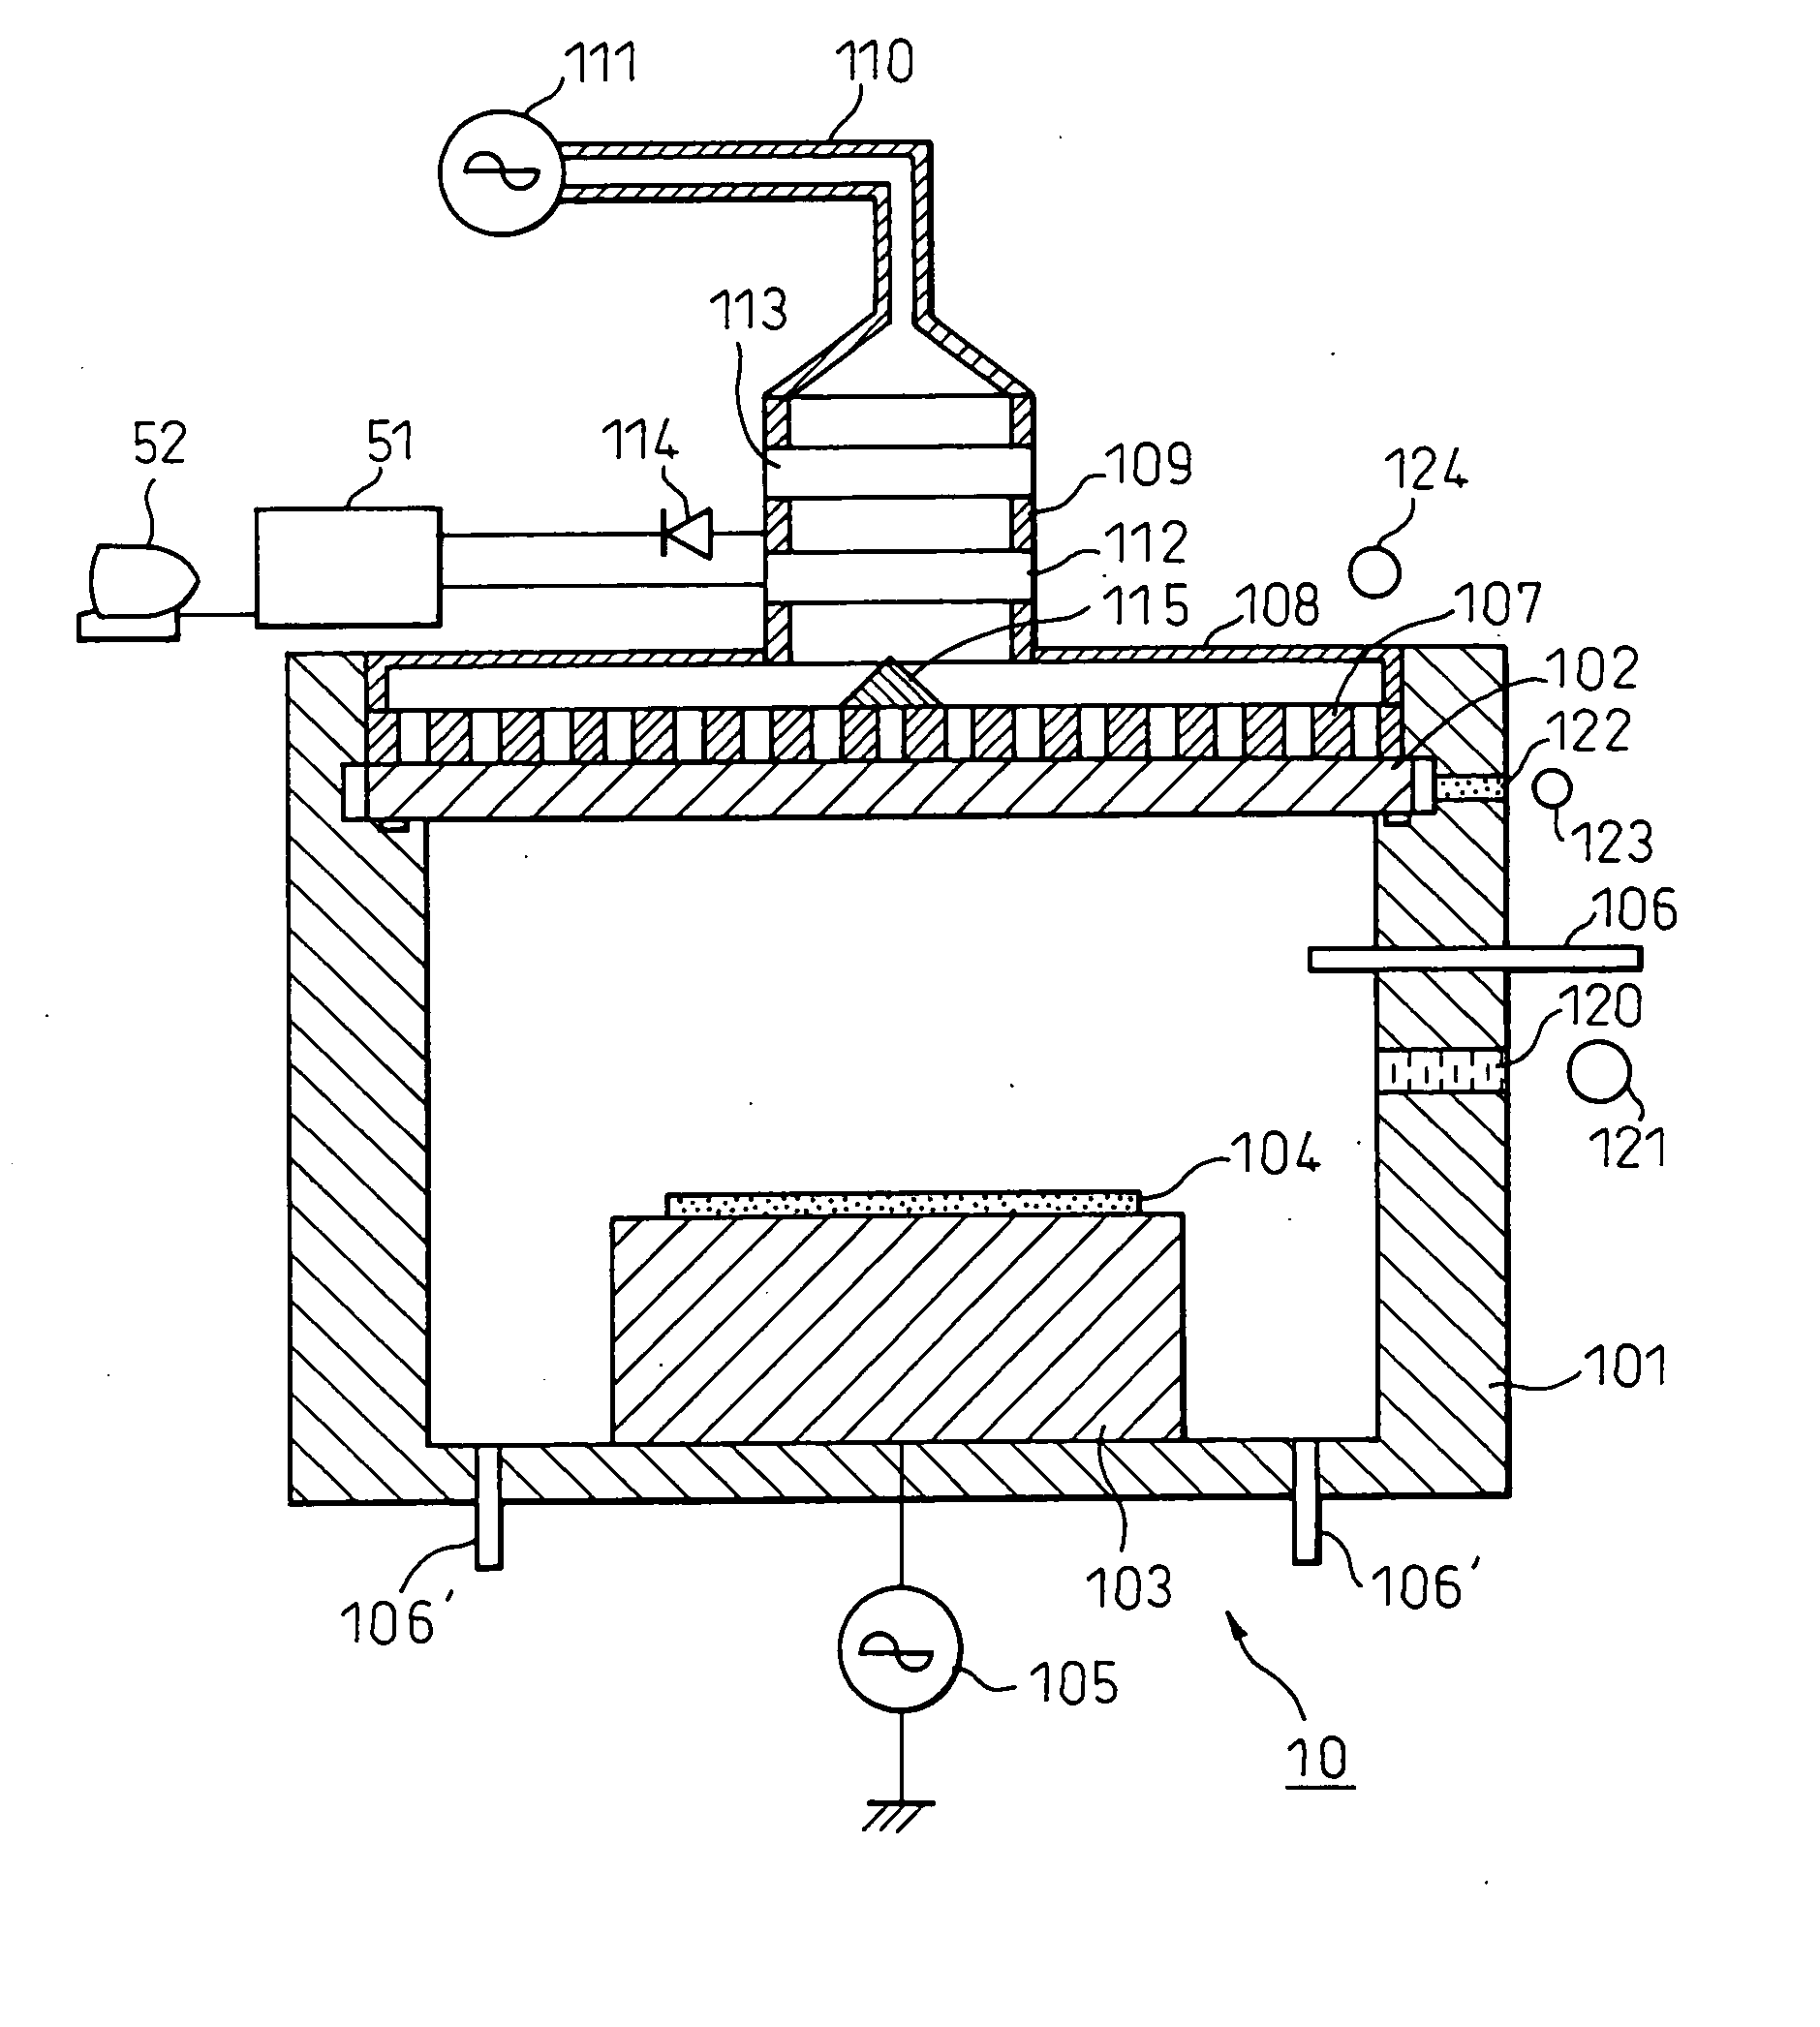 Plasma processing apparatus and controlling method therefor